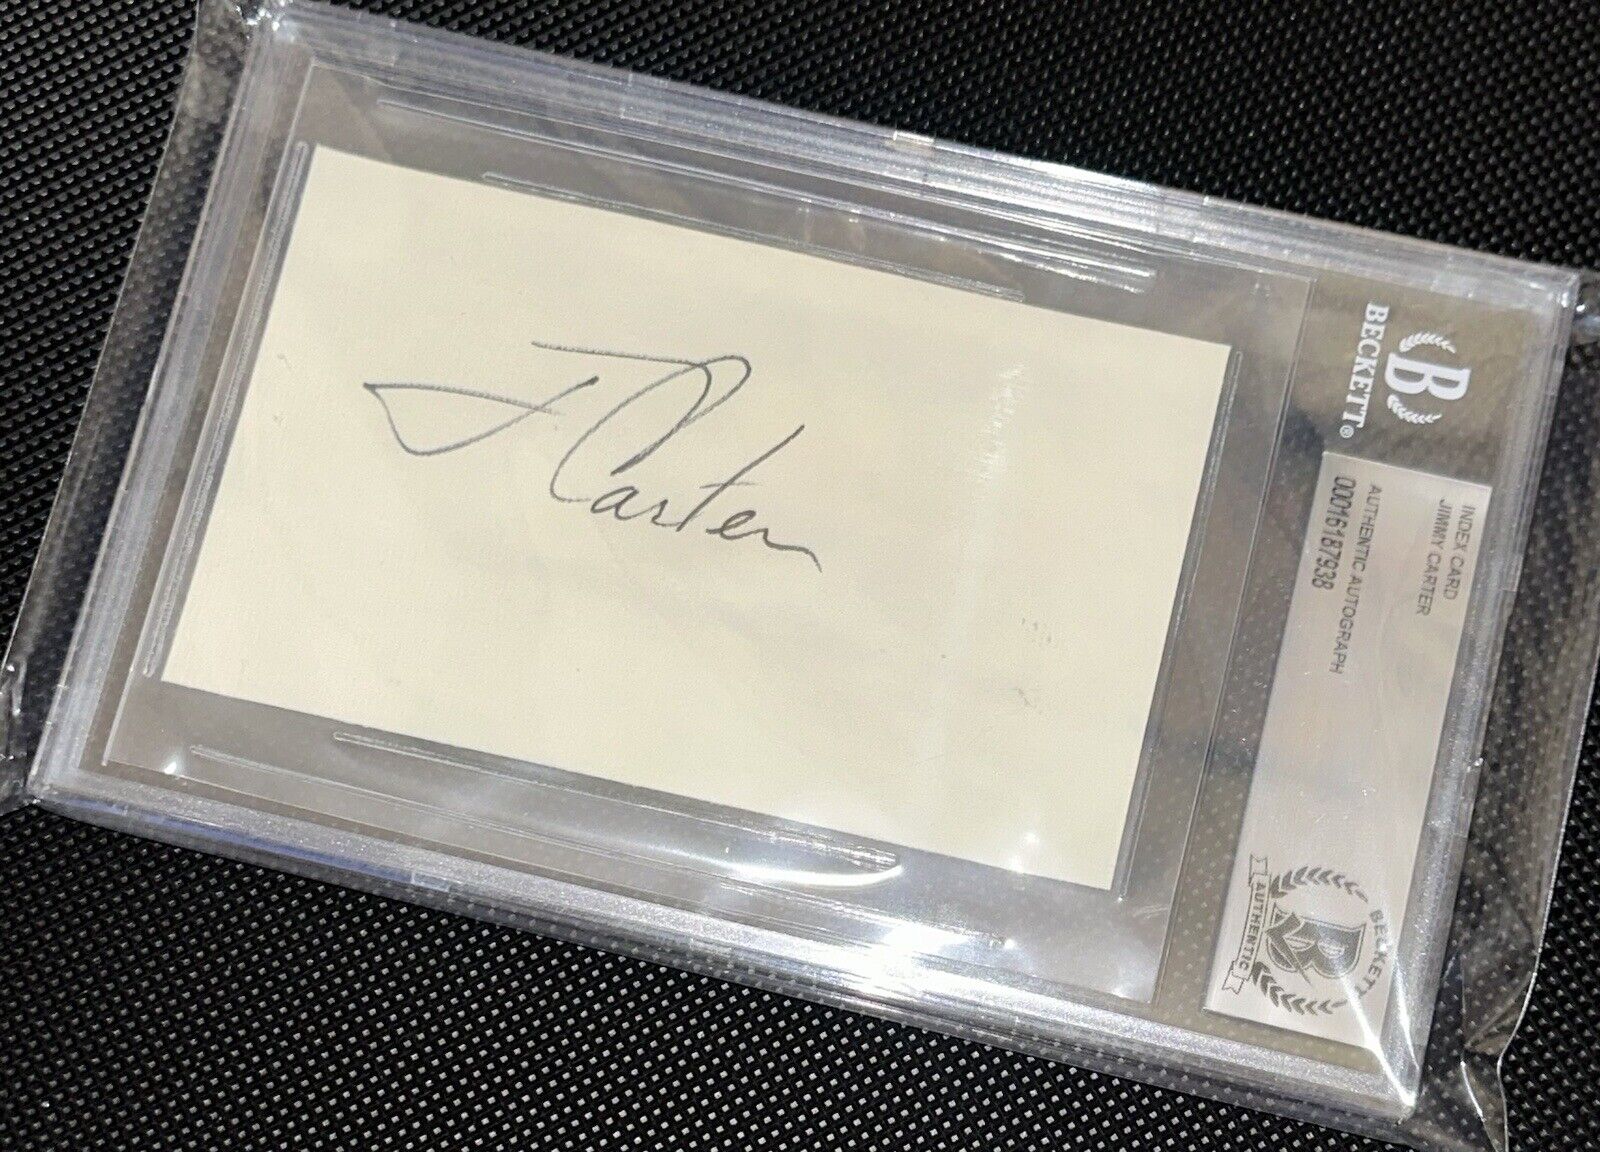 Jimmy Carter Hand Signed 3x5 Index Card Beckett Encapsulated Certified Autograph